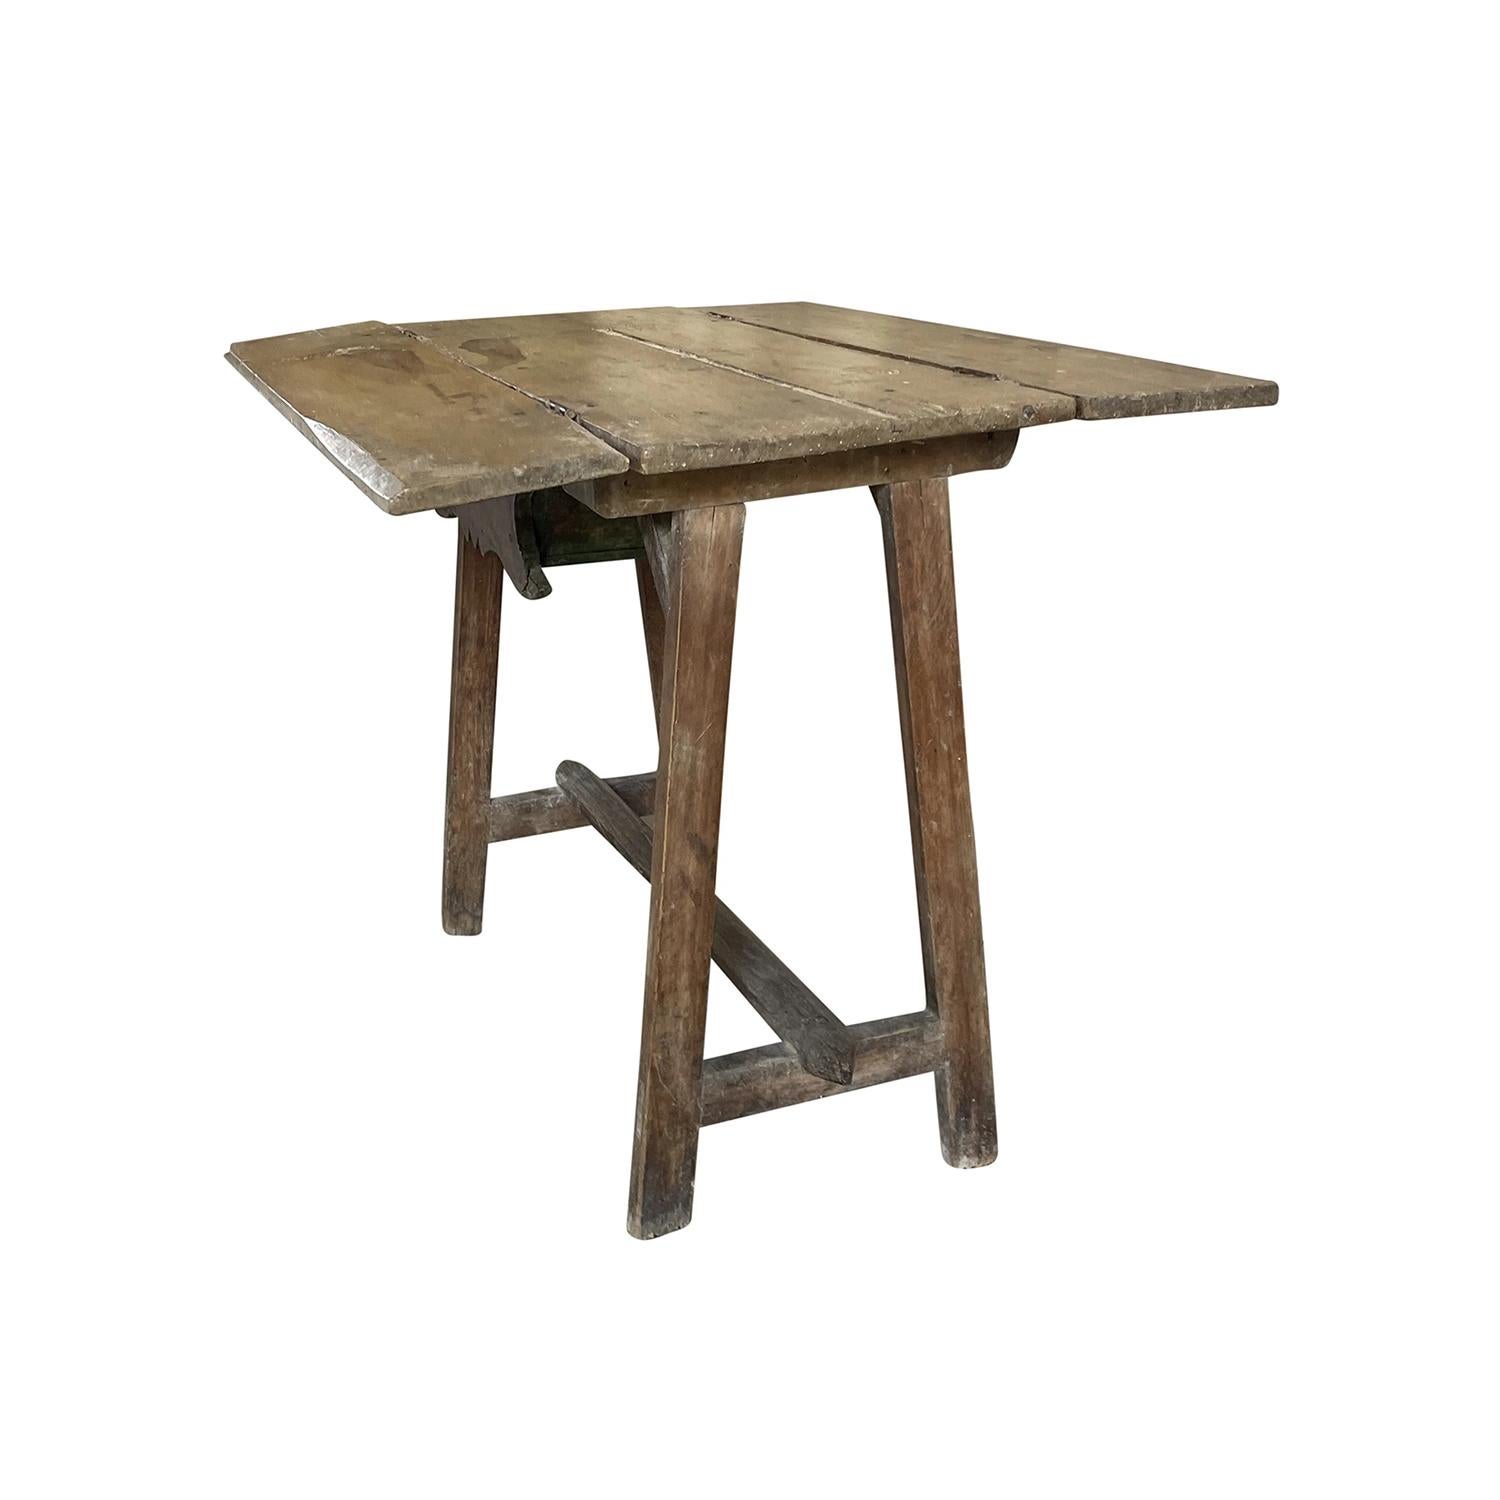 Baroque 18th Century Italian Small Foldable Walnut Side Table - Antique Tuscan Table For Sale